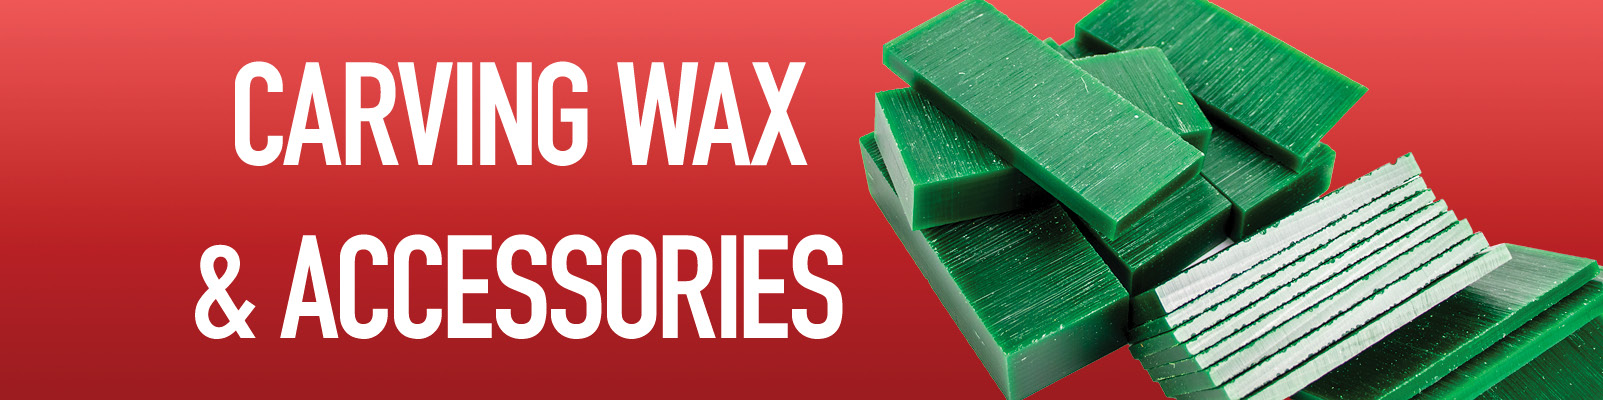 Carving Wax & Accessories